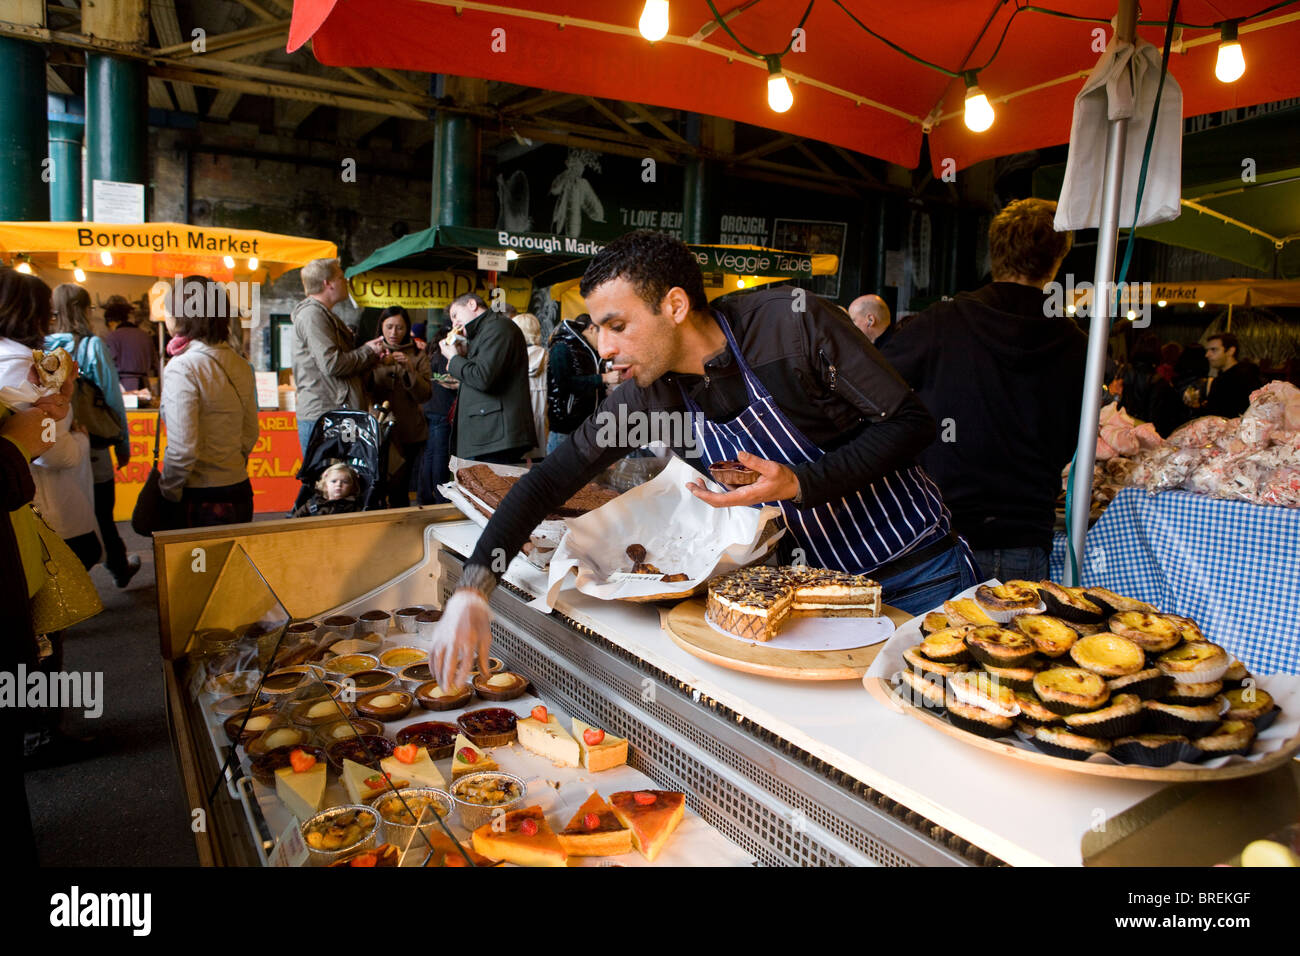 Borough Market trader selling cakes, confectionary and desserts Stock Photo